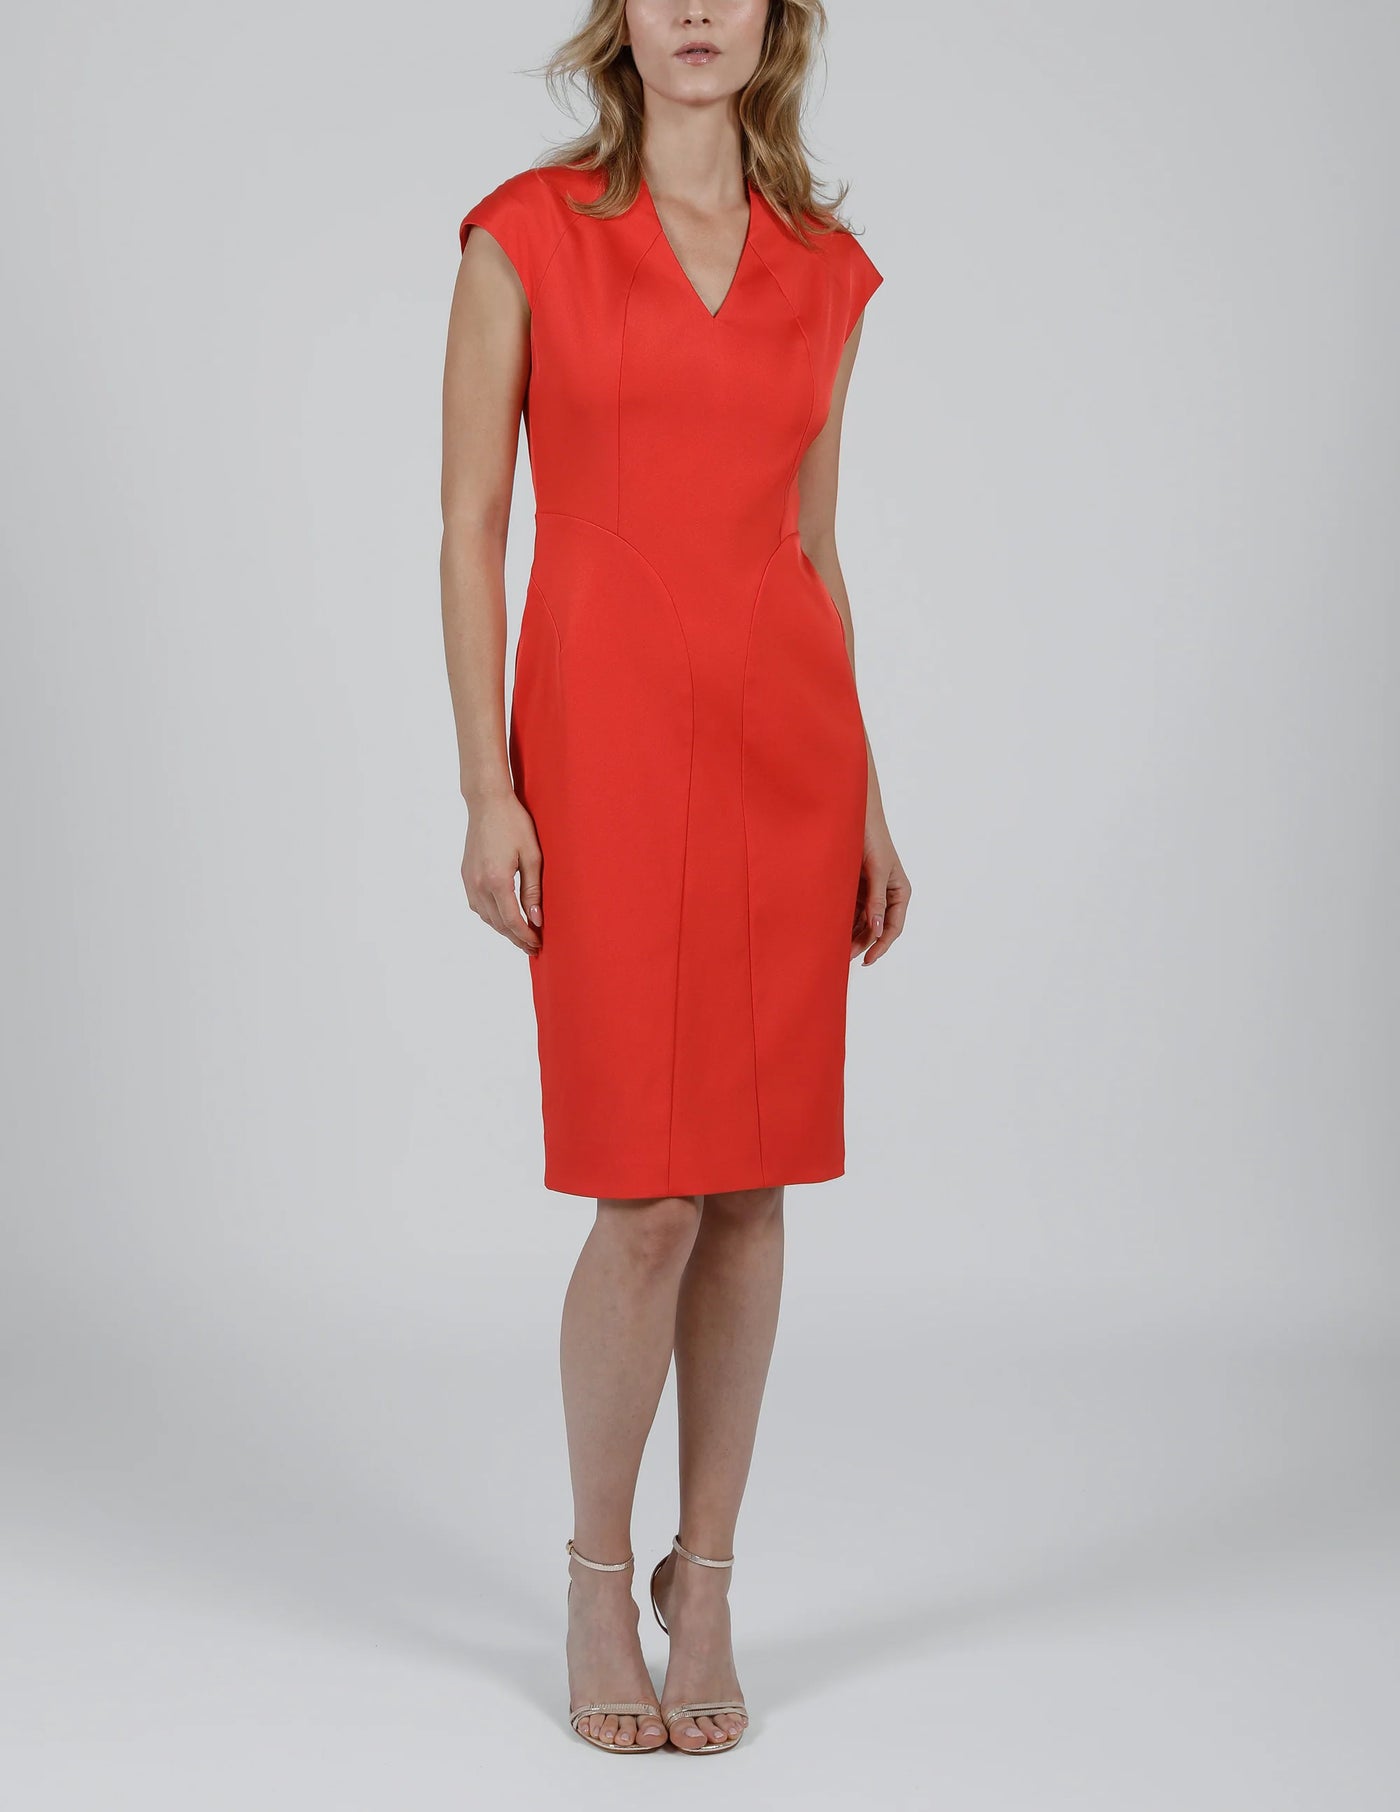 Liquid Suiting Dress in Coral